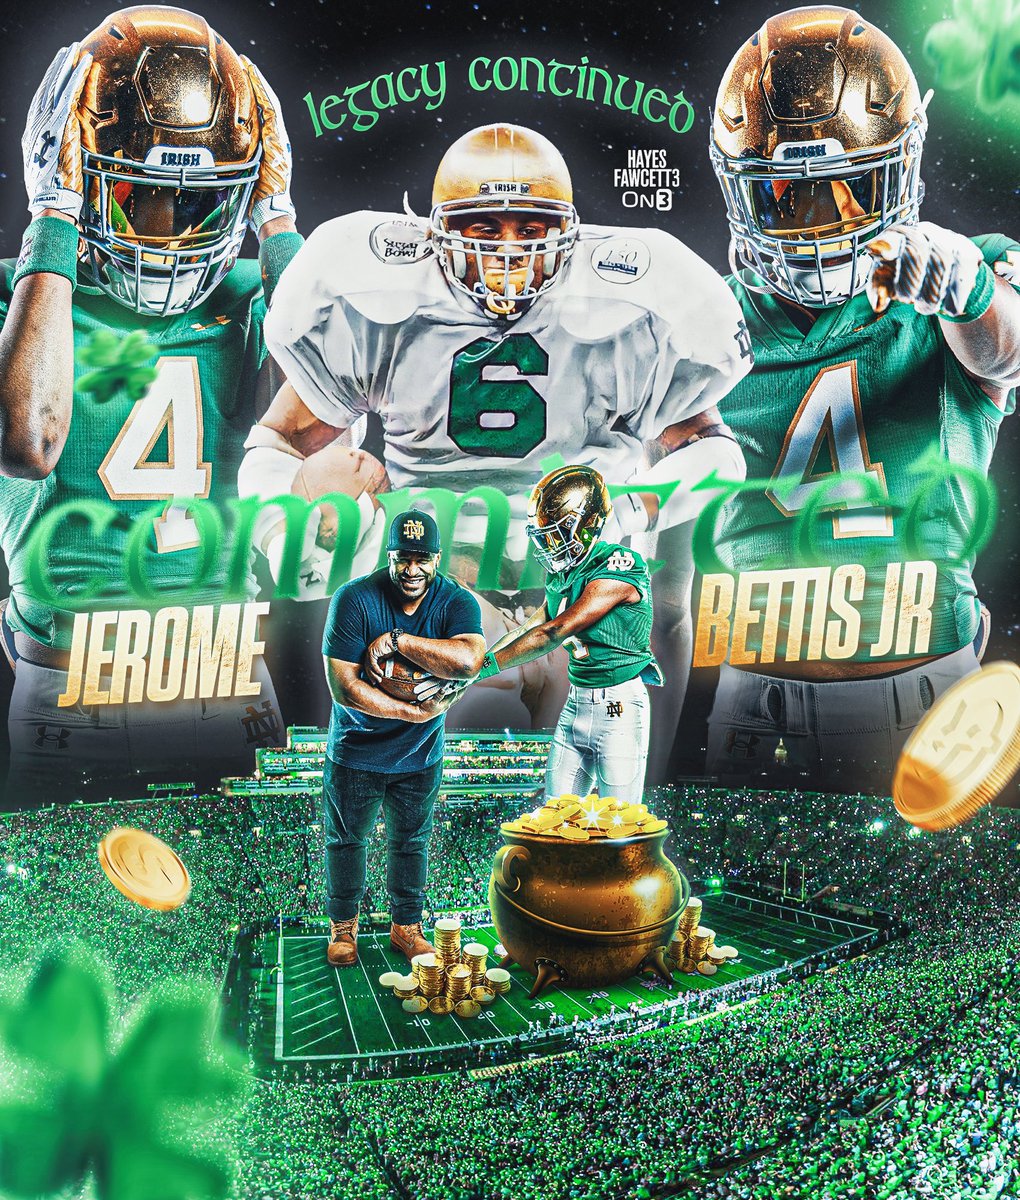 BREAKING: Class of 2025 WR Jerome Bettis Jr. has Committed to Notre Dame, he tells me for @on3recruits The 6’3 190 WR from Atlanta, GA chose the Fighting Irish over Texas A&M, Duke, & Ole Miss “Success is earned, not inherited. Go Irish ☘️” on3.com/db/jerome-bett…